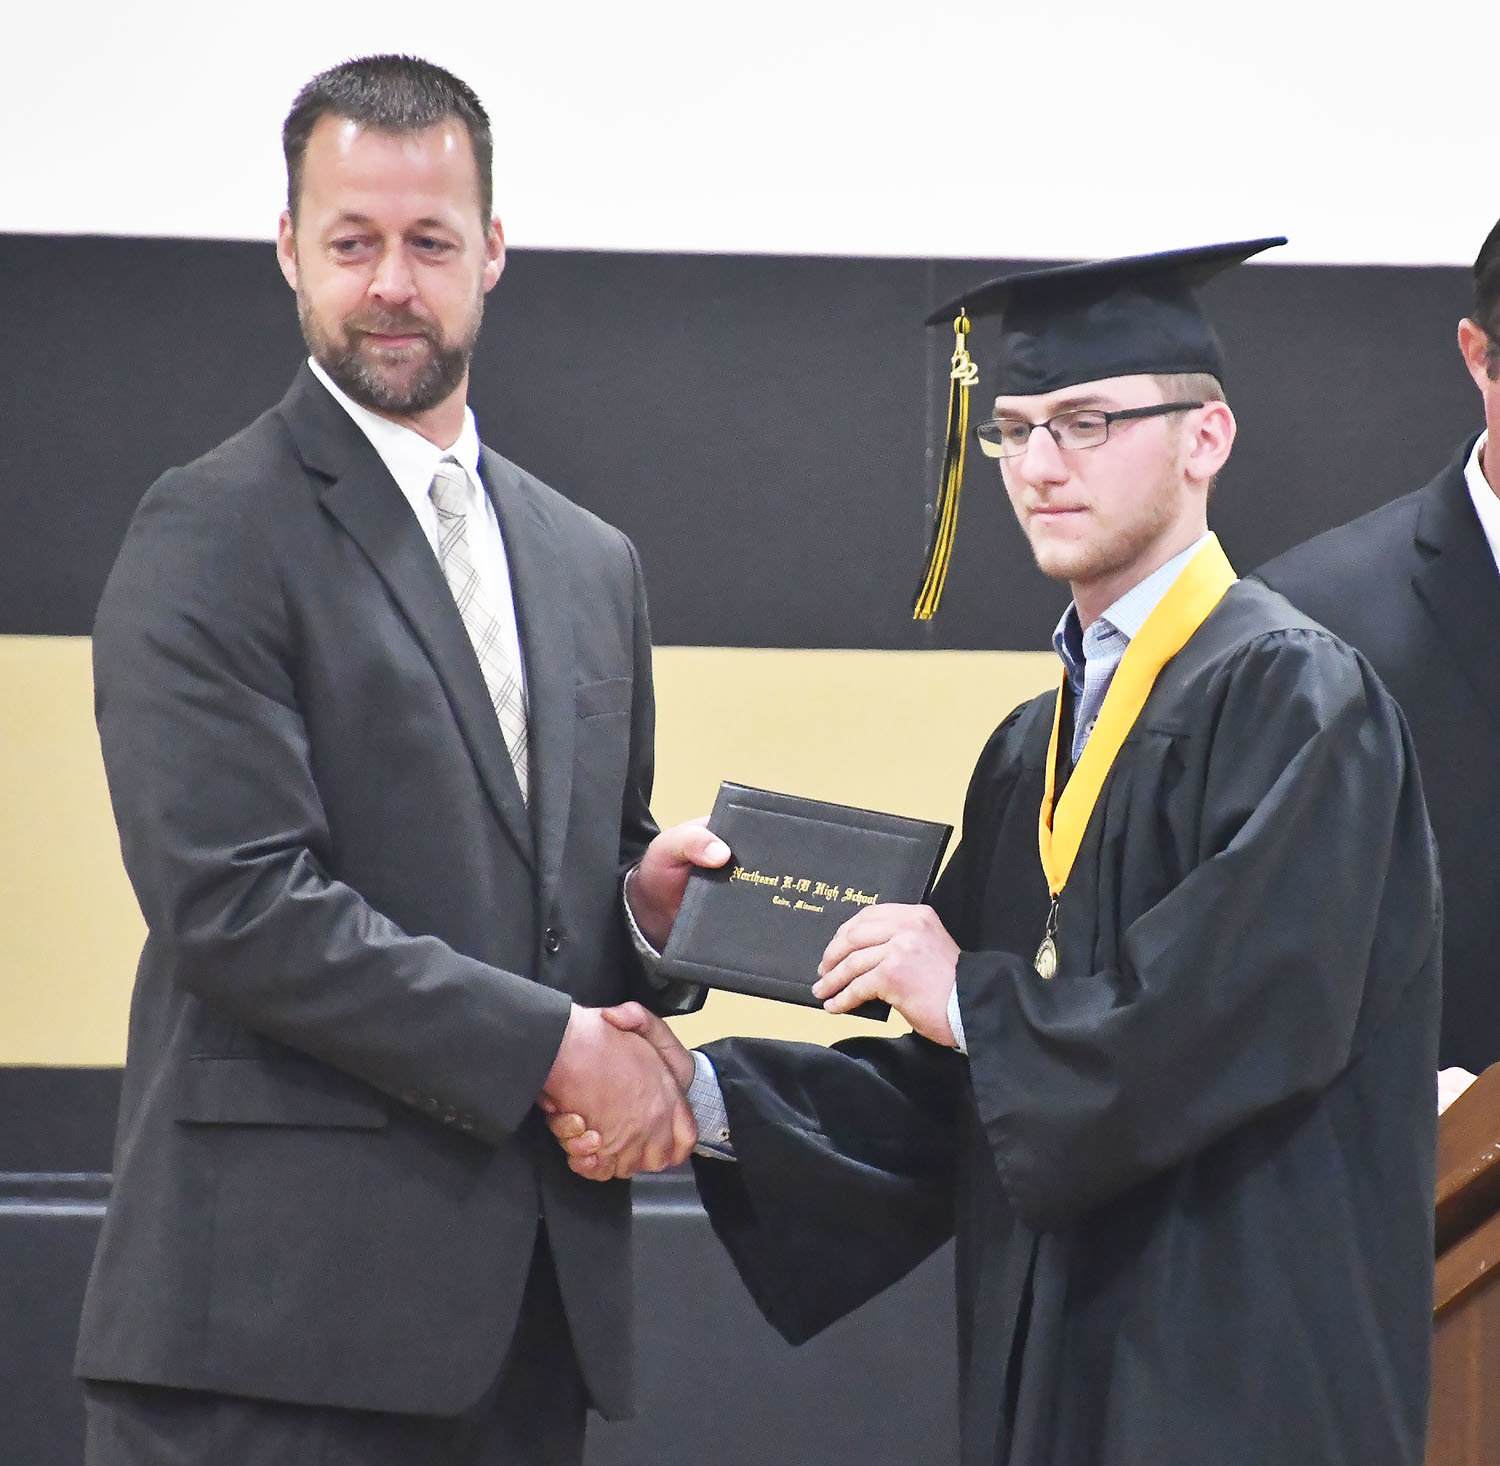 Cairo board of education president Henry Westhues presents a diploma to Class of 2022 graduate Brandon Schumann.